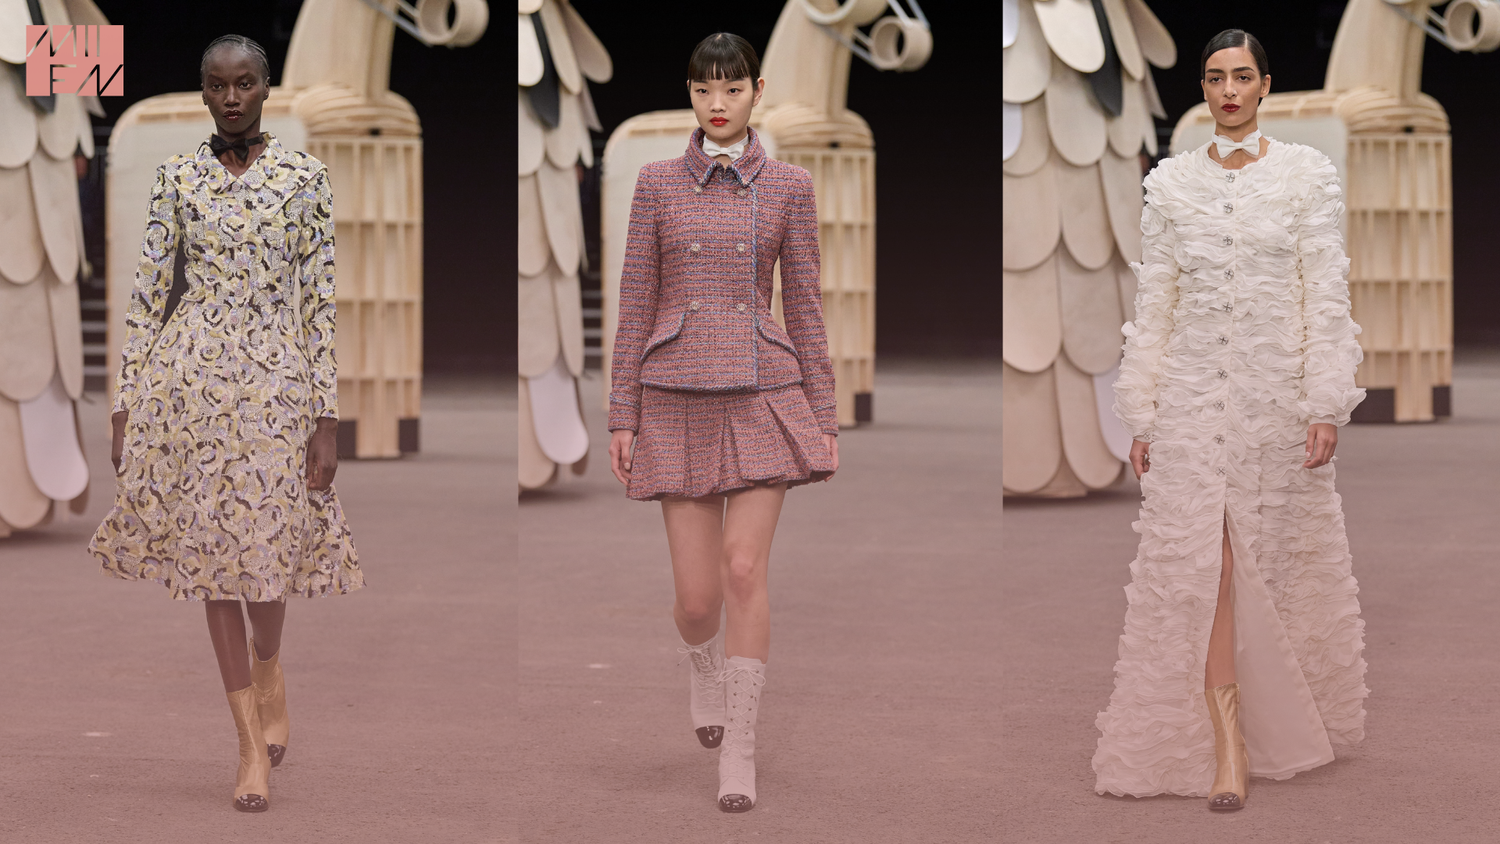 These 3 fashion trends spotted at the Chanel show will make waves next  summer